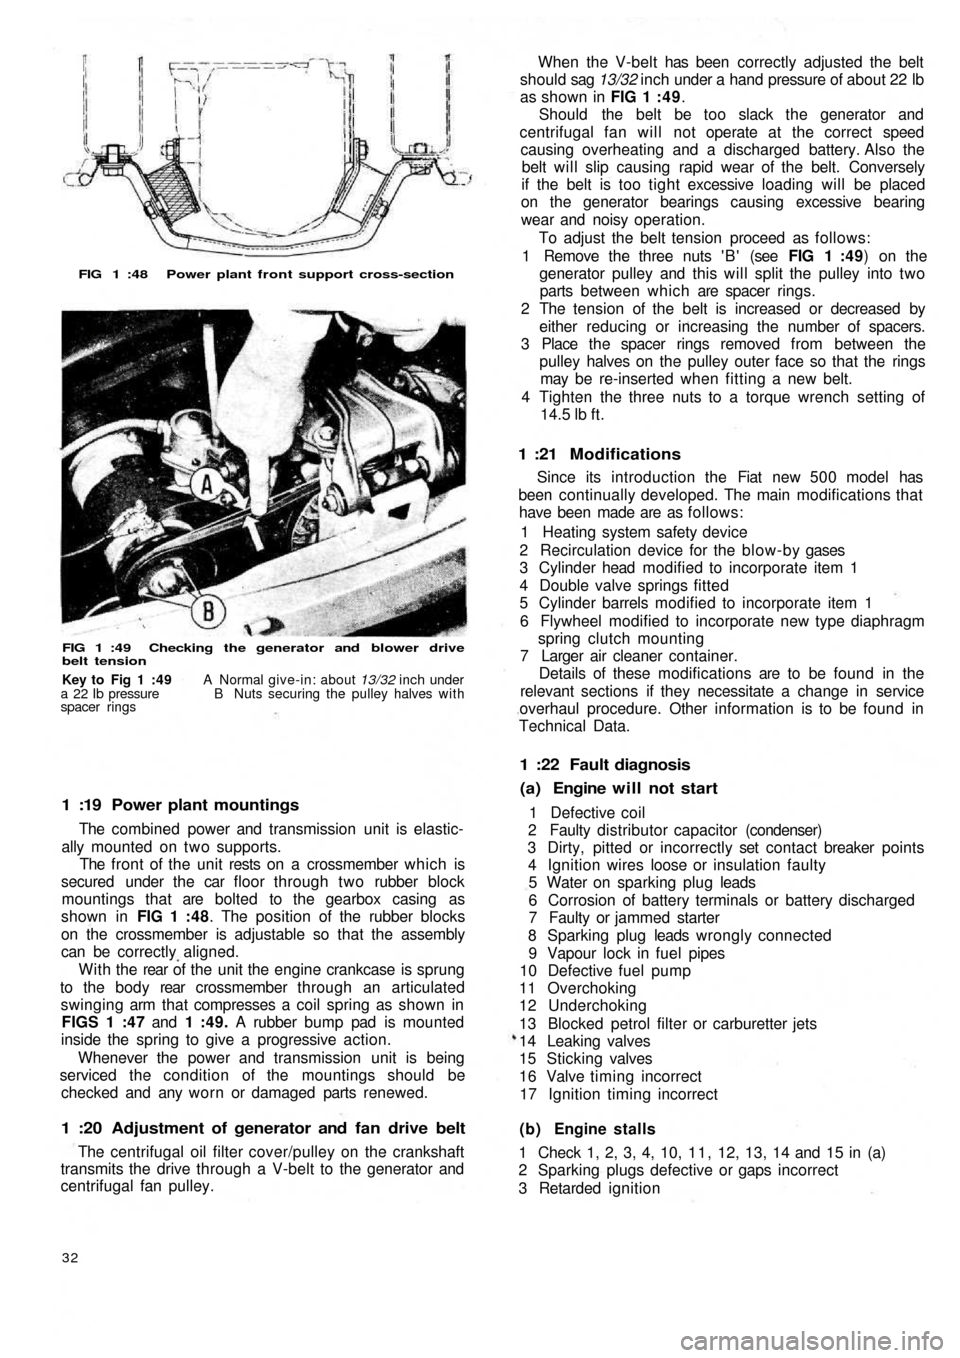 FIAT 500 1969 1.G Workshop Manual FIG 1 :48  Power plant front support cross-section
FIG 1 :49  Checking  the generator and  blower drive
belt tension
1 :19  Power plant mountings
The combined power and transmission unit is elastic-
a